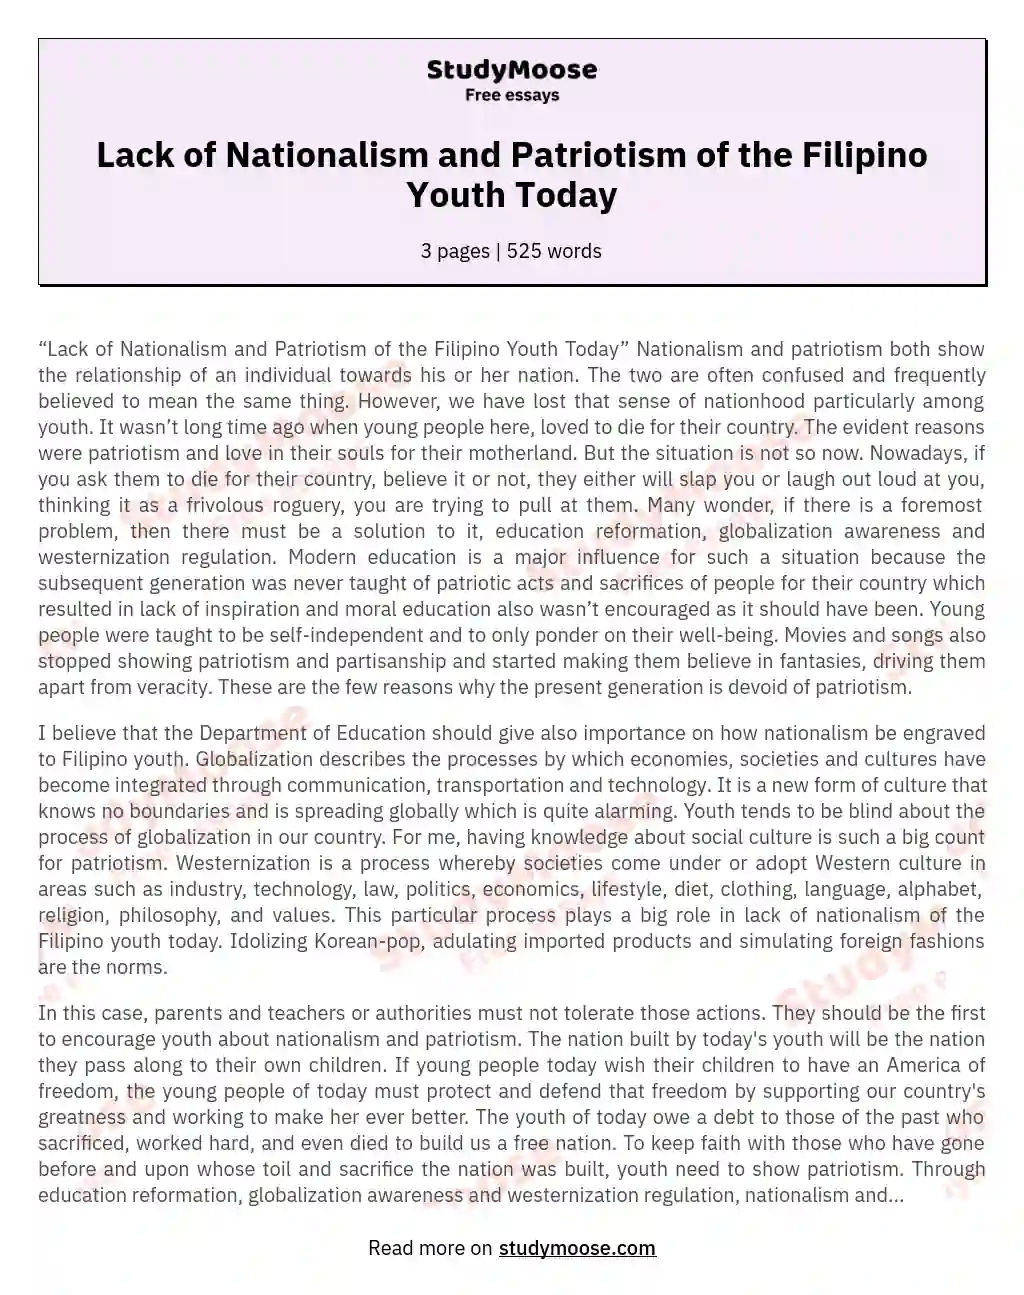 Lack of Nationalism and Patriotism of the Filipino Youth Today essay